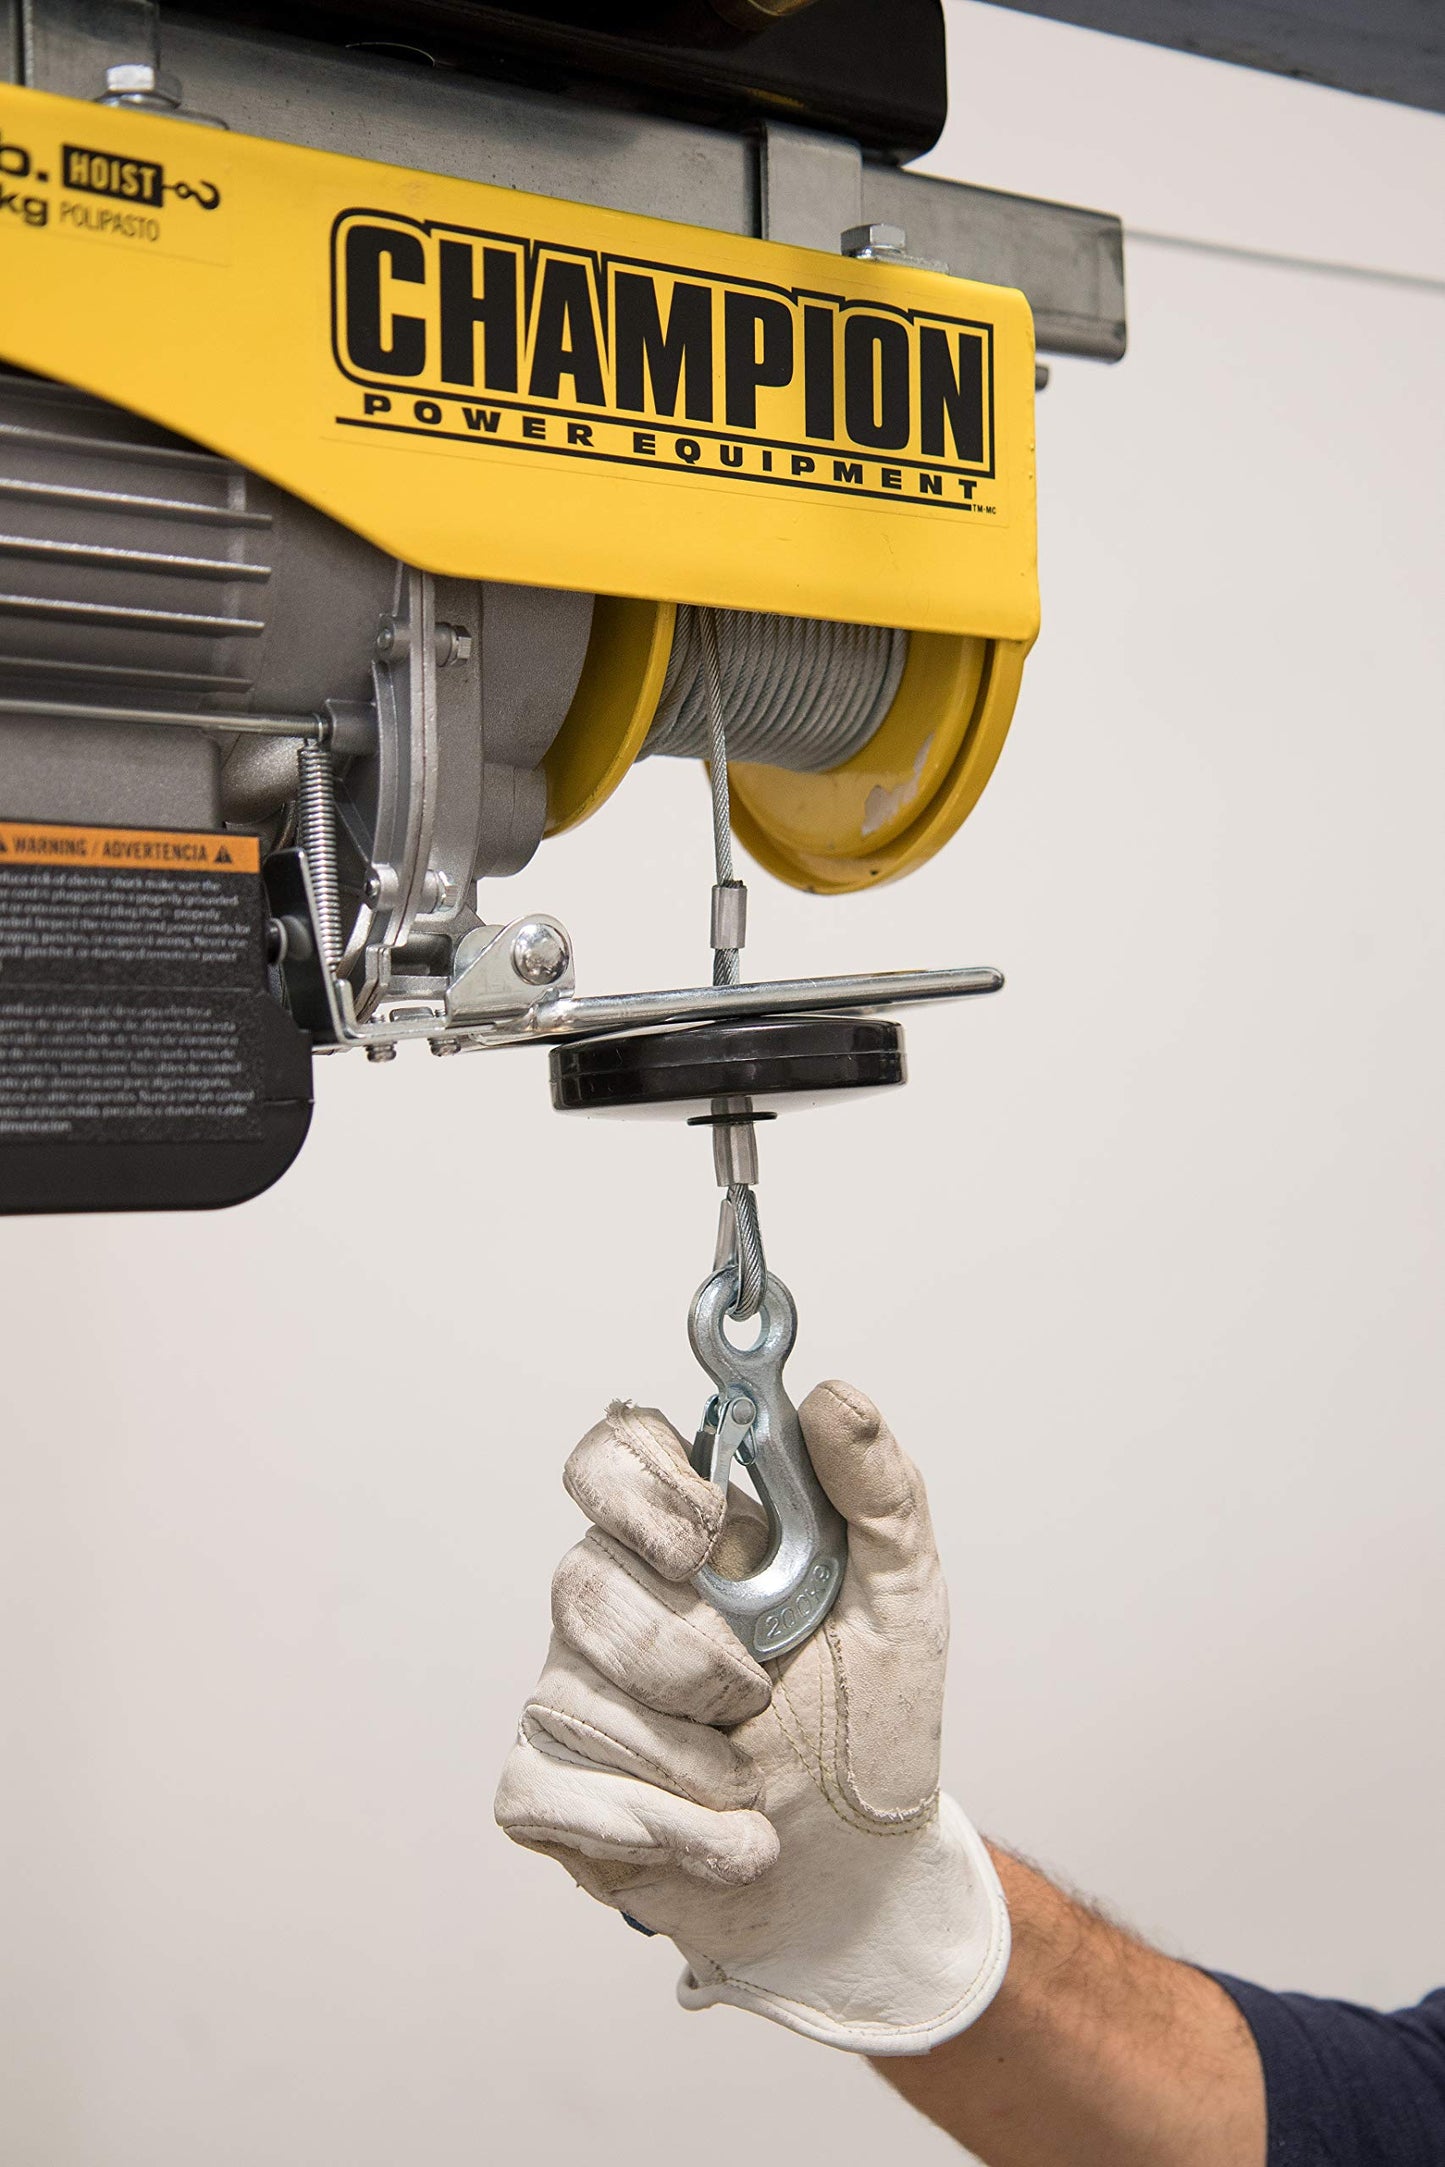 Champion Power Equipment-18890 Automatic Electric Hoist with Remote Control - Yellow, 440/880-lb.